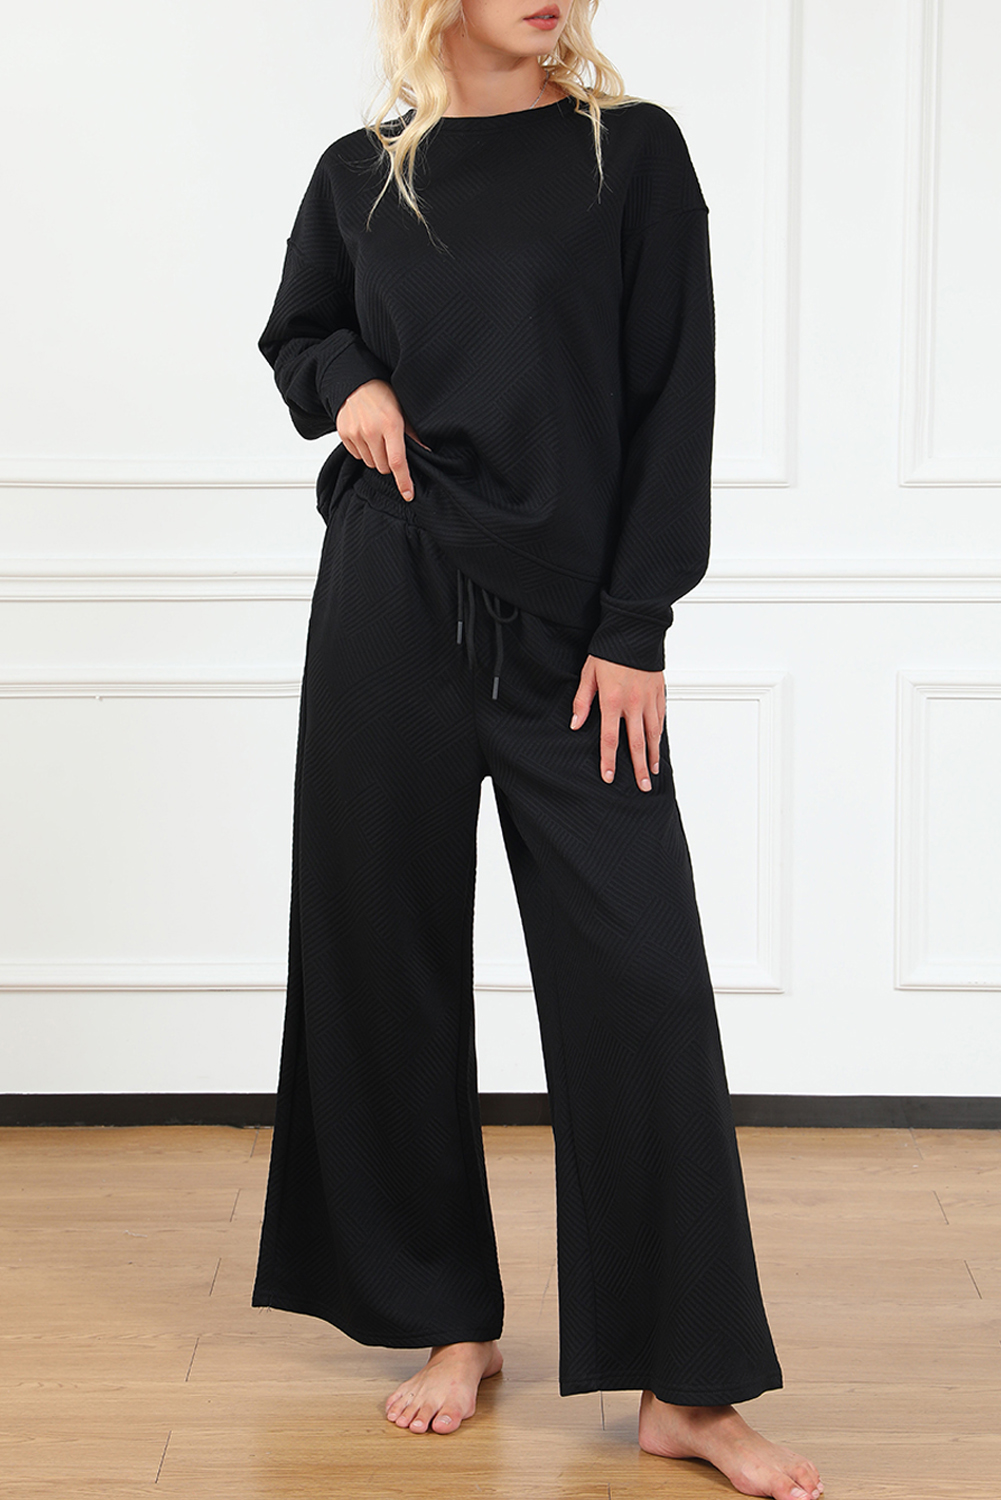 Shewin Wholesale WESTERN Boutique Black Textured Loose Slouchy Long Sleeve Top and Pants Set